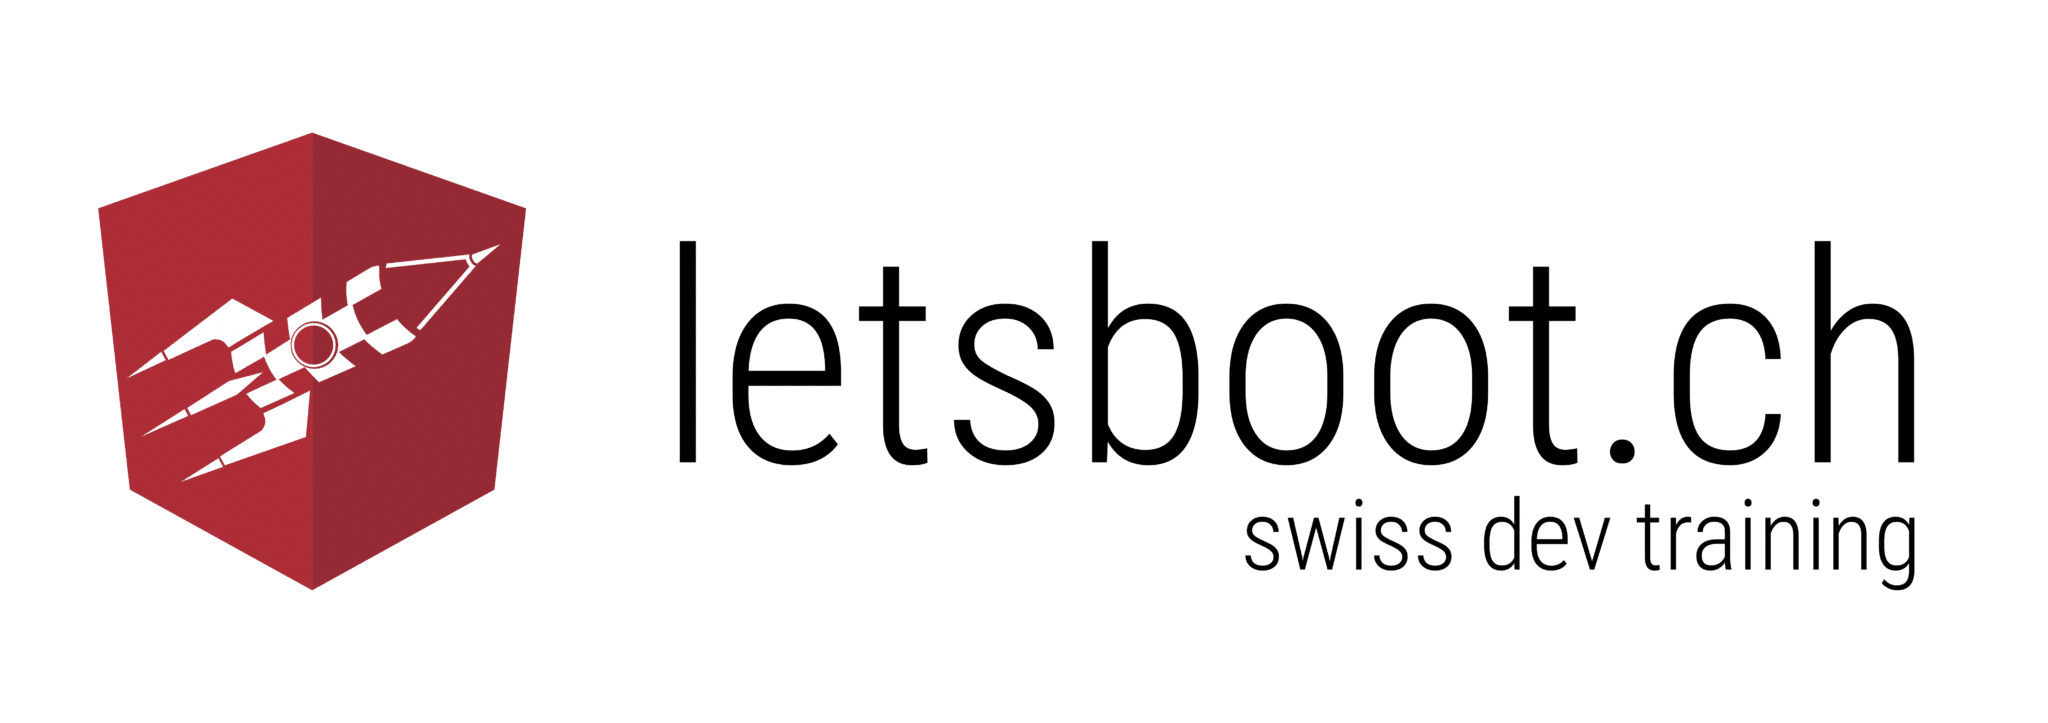 letsboot.ch-claim-fonts